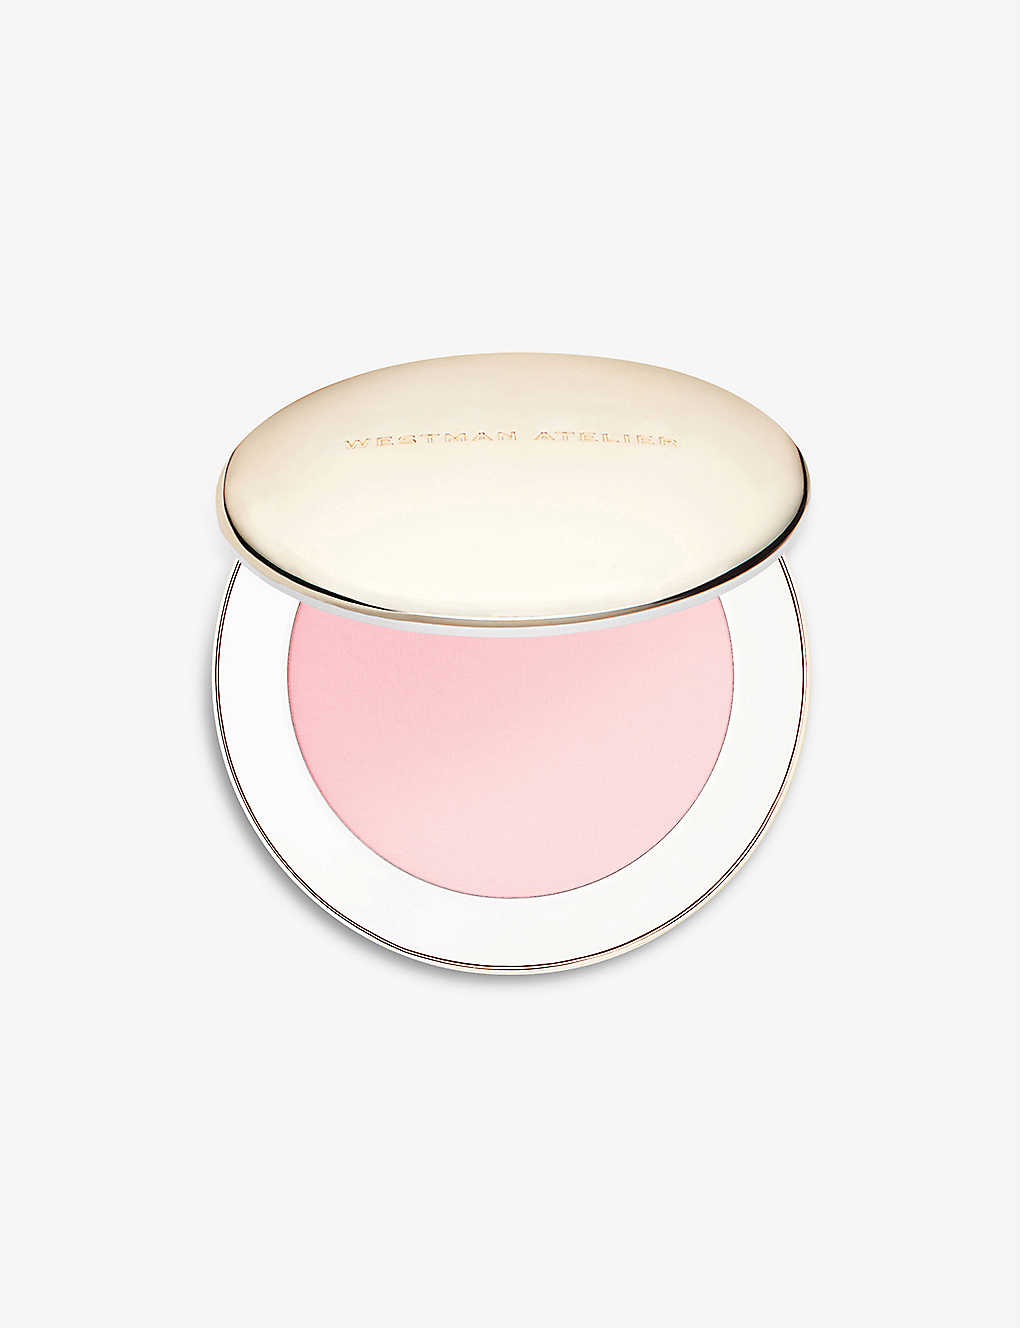 Westman Atelier Vital Pressed Skincare Powder 5g In Pink Bubble